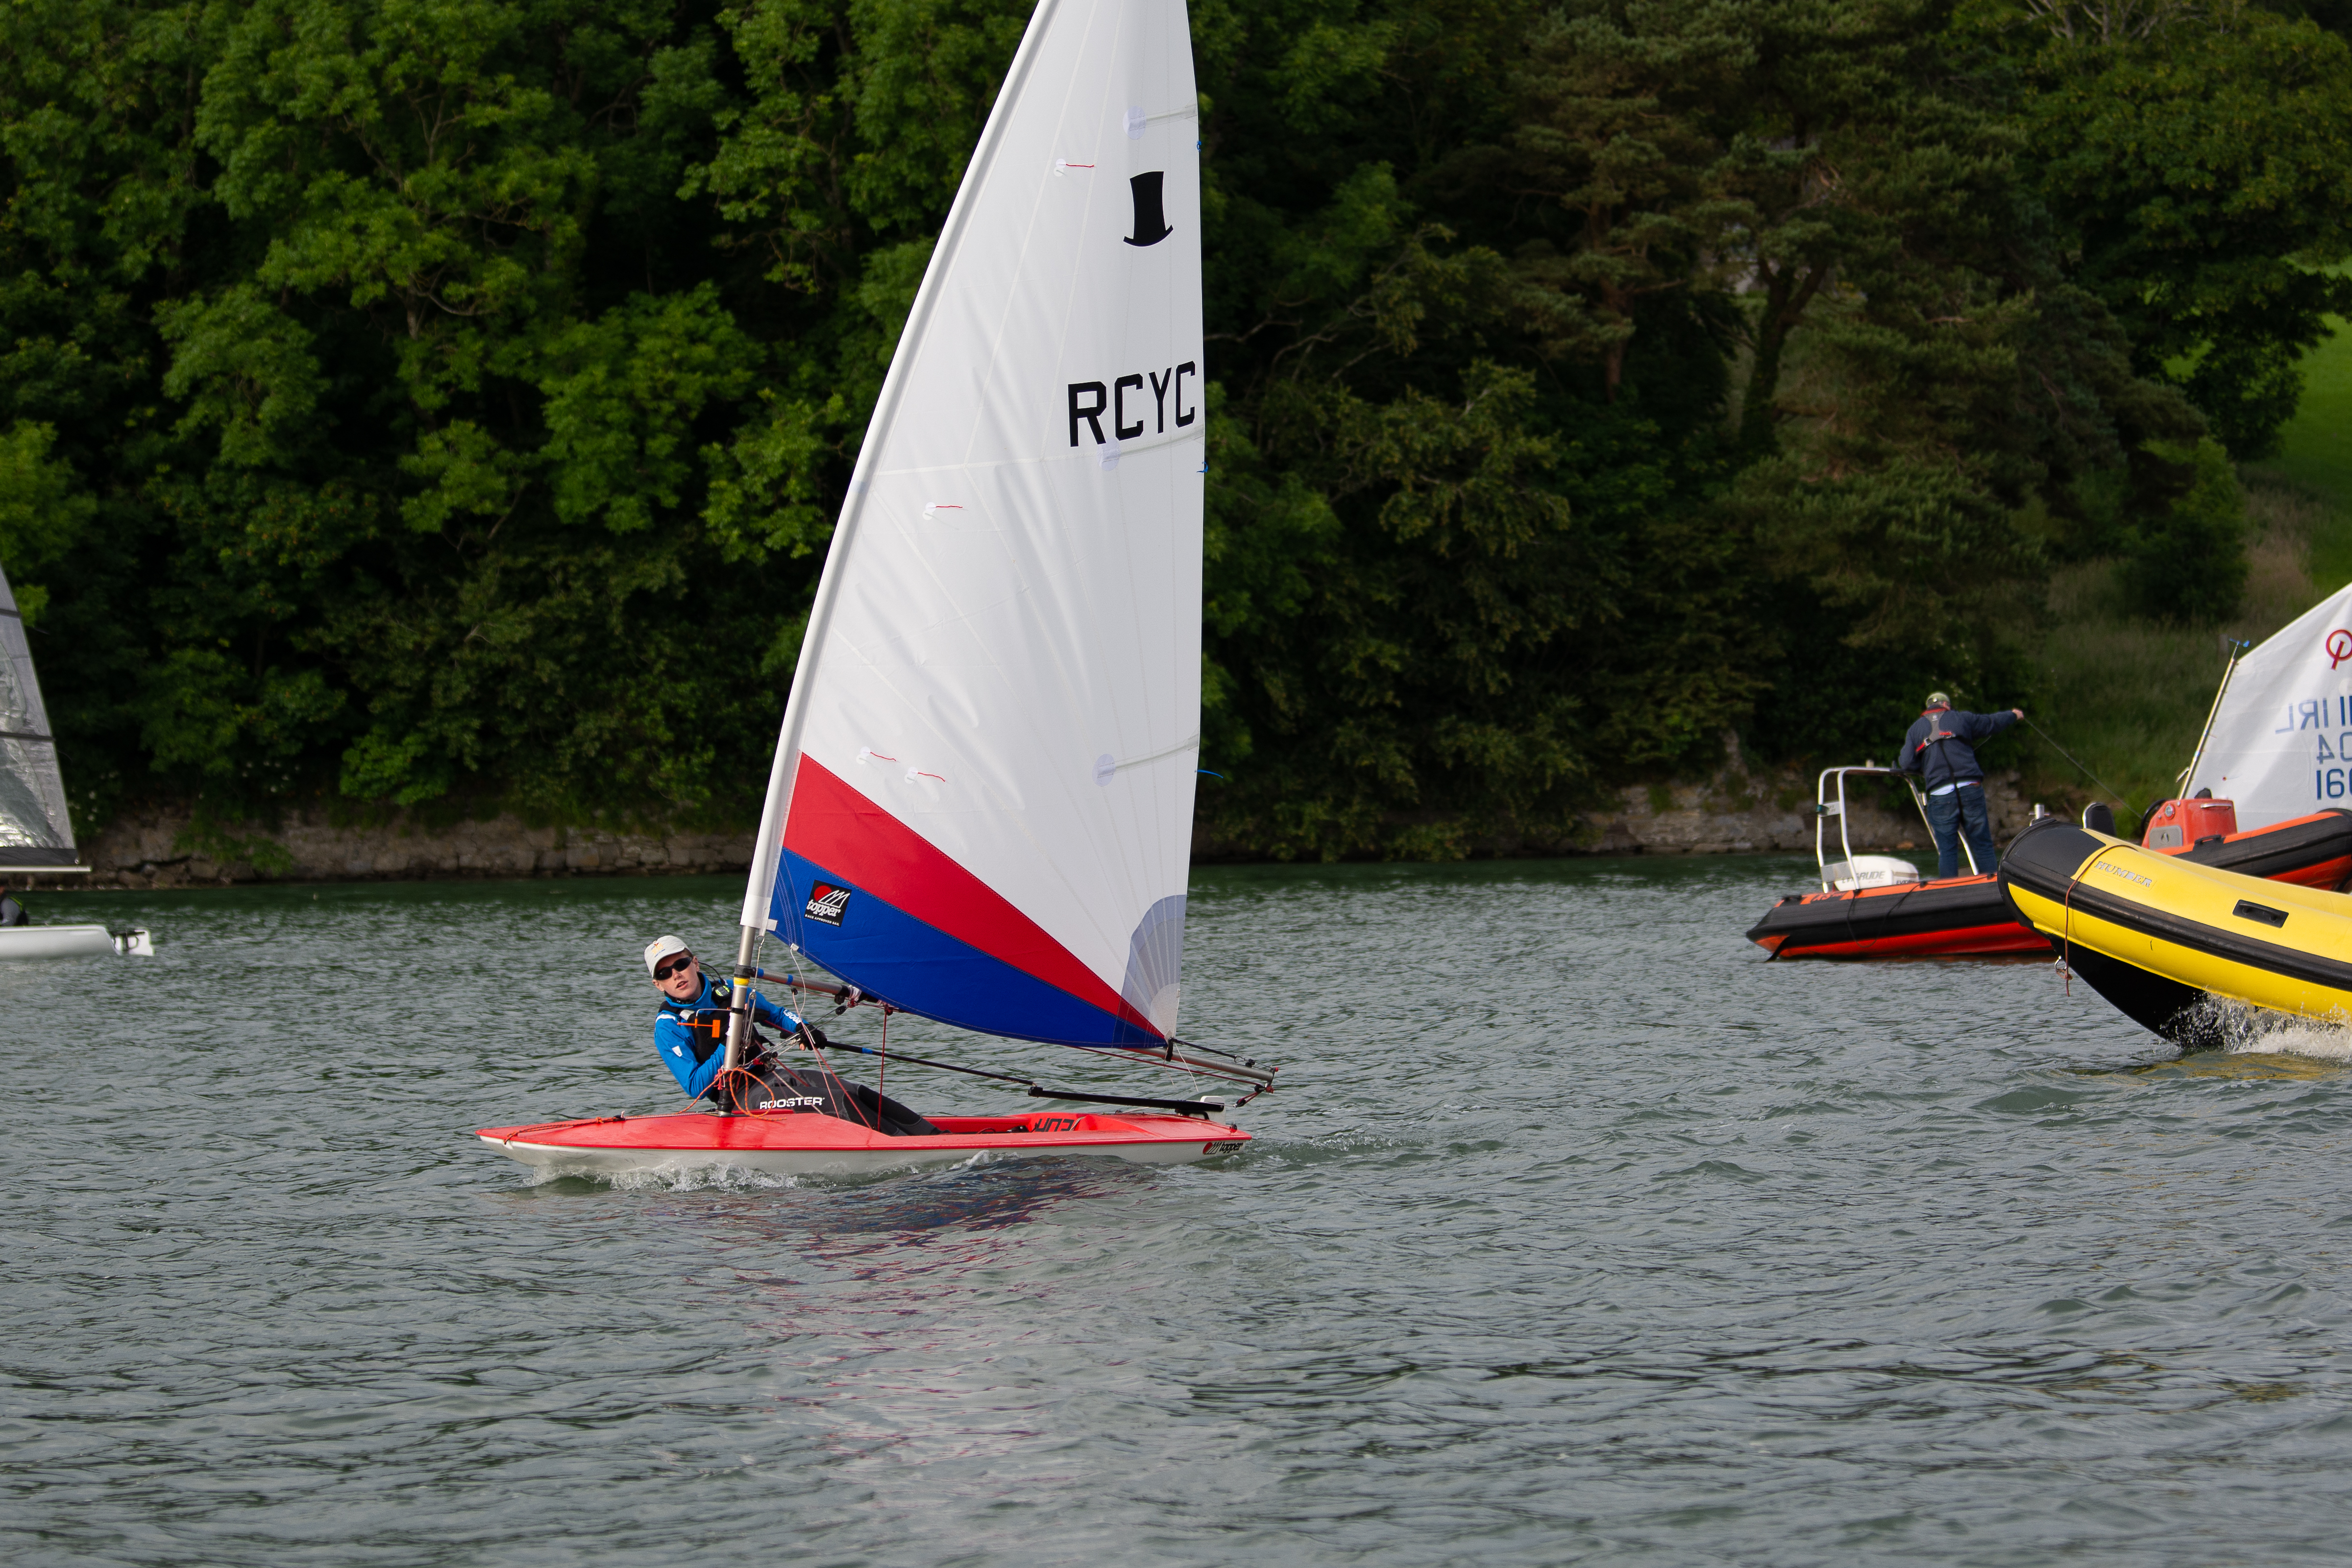 New Topper 6.4 rig racing in the Coolmoor race, Royal Cork Yacht Club 2021.